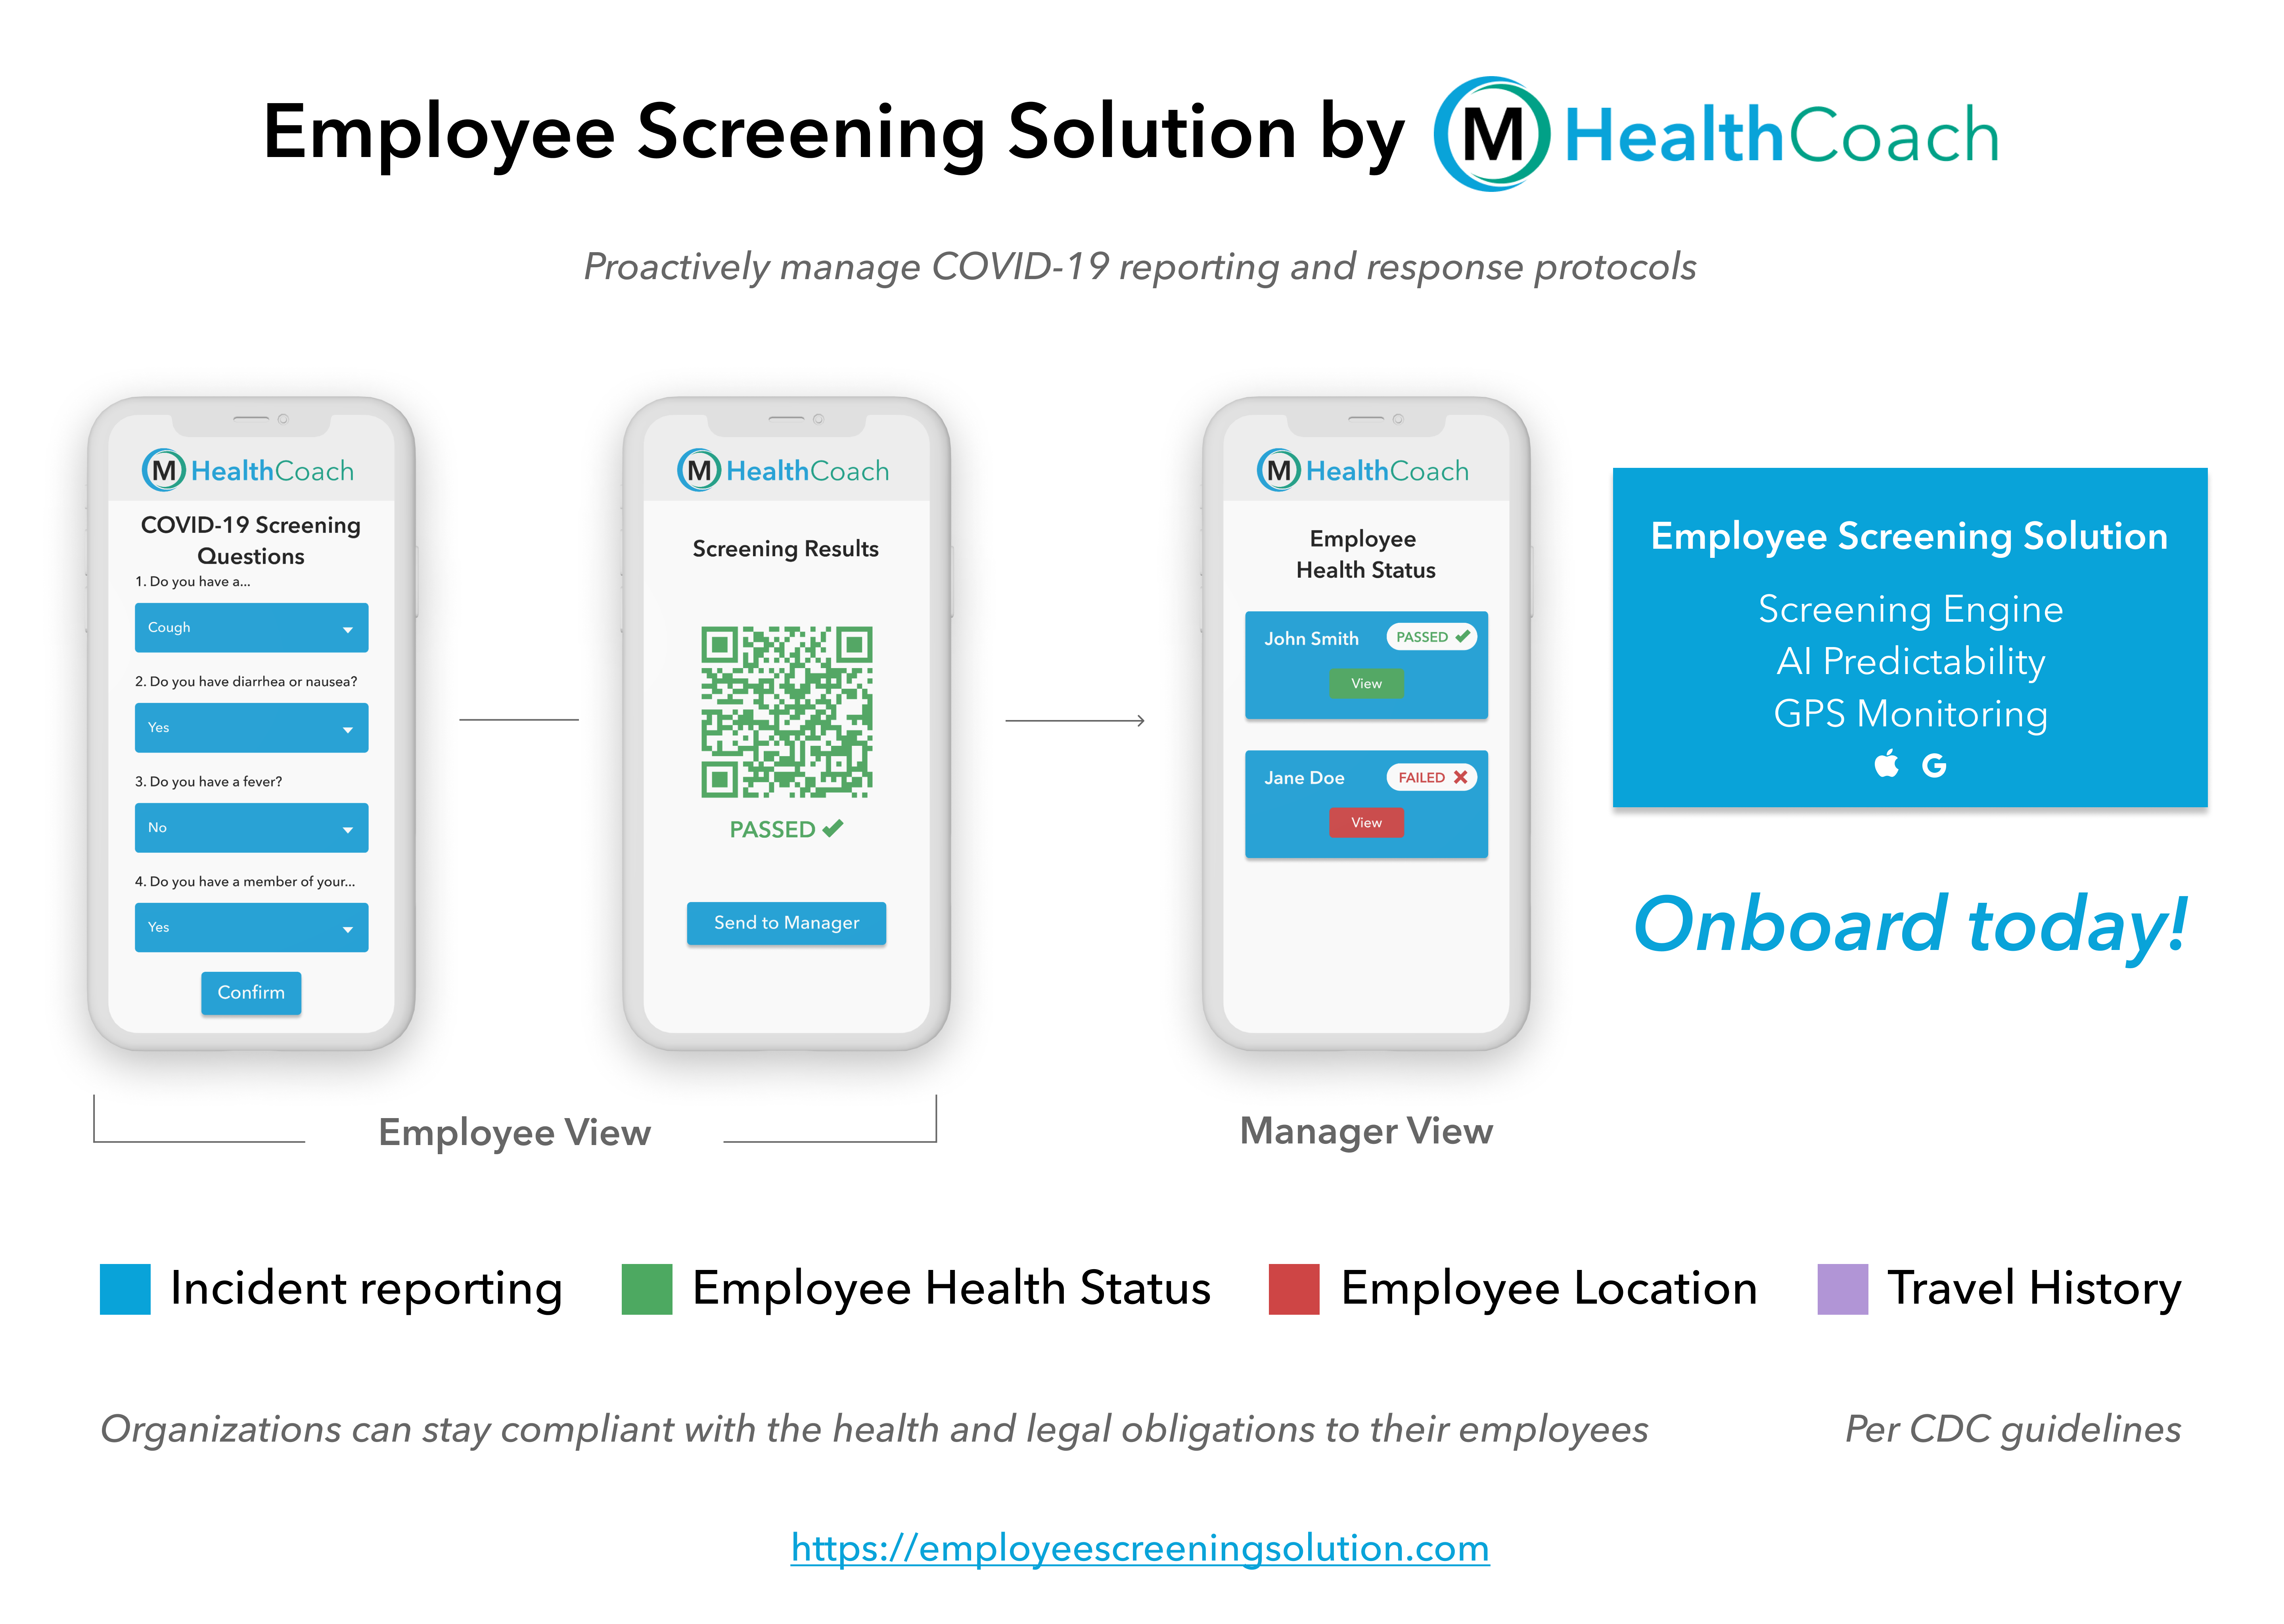 mHealthCoach Releases Solution to Help Businesses Protect Employees from Coronavirus Pandemic